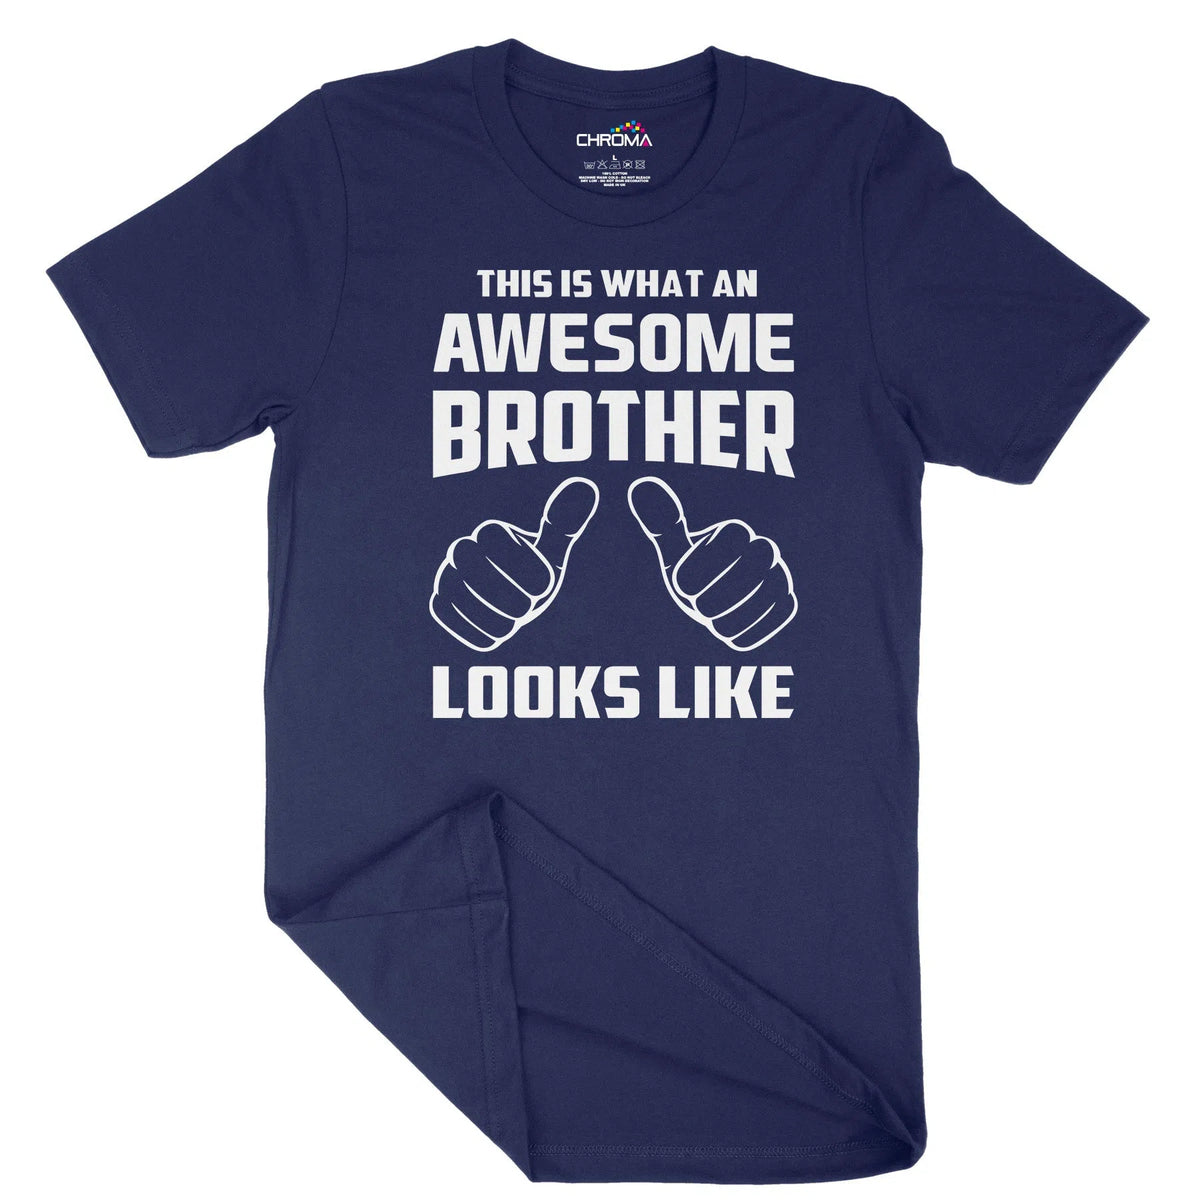 This Is What An Awesome Brother Looks Like Unisex Adult T-Shirt | Qual Chroma Clothing